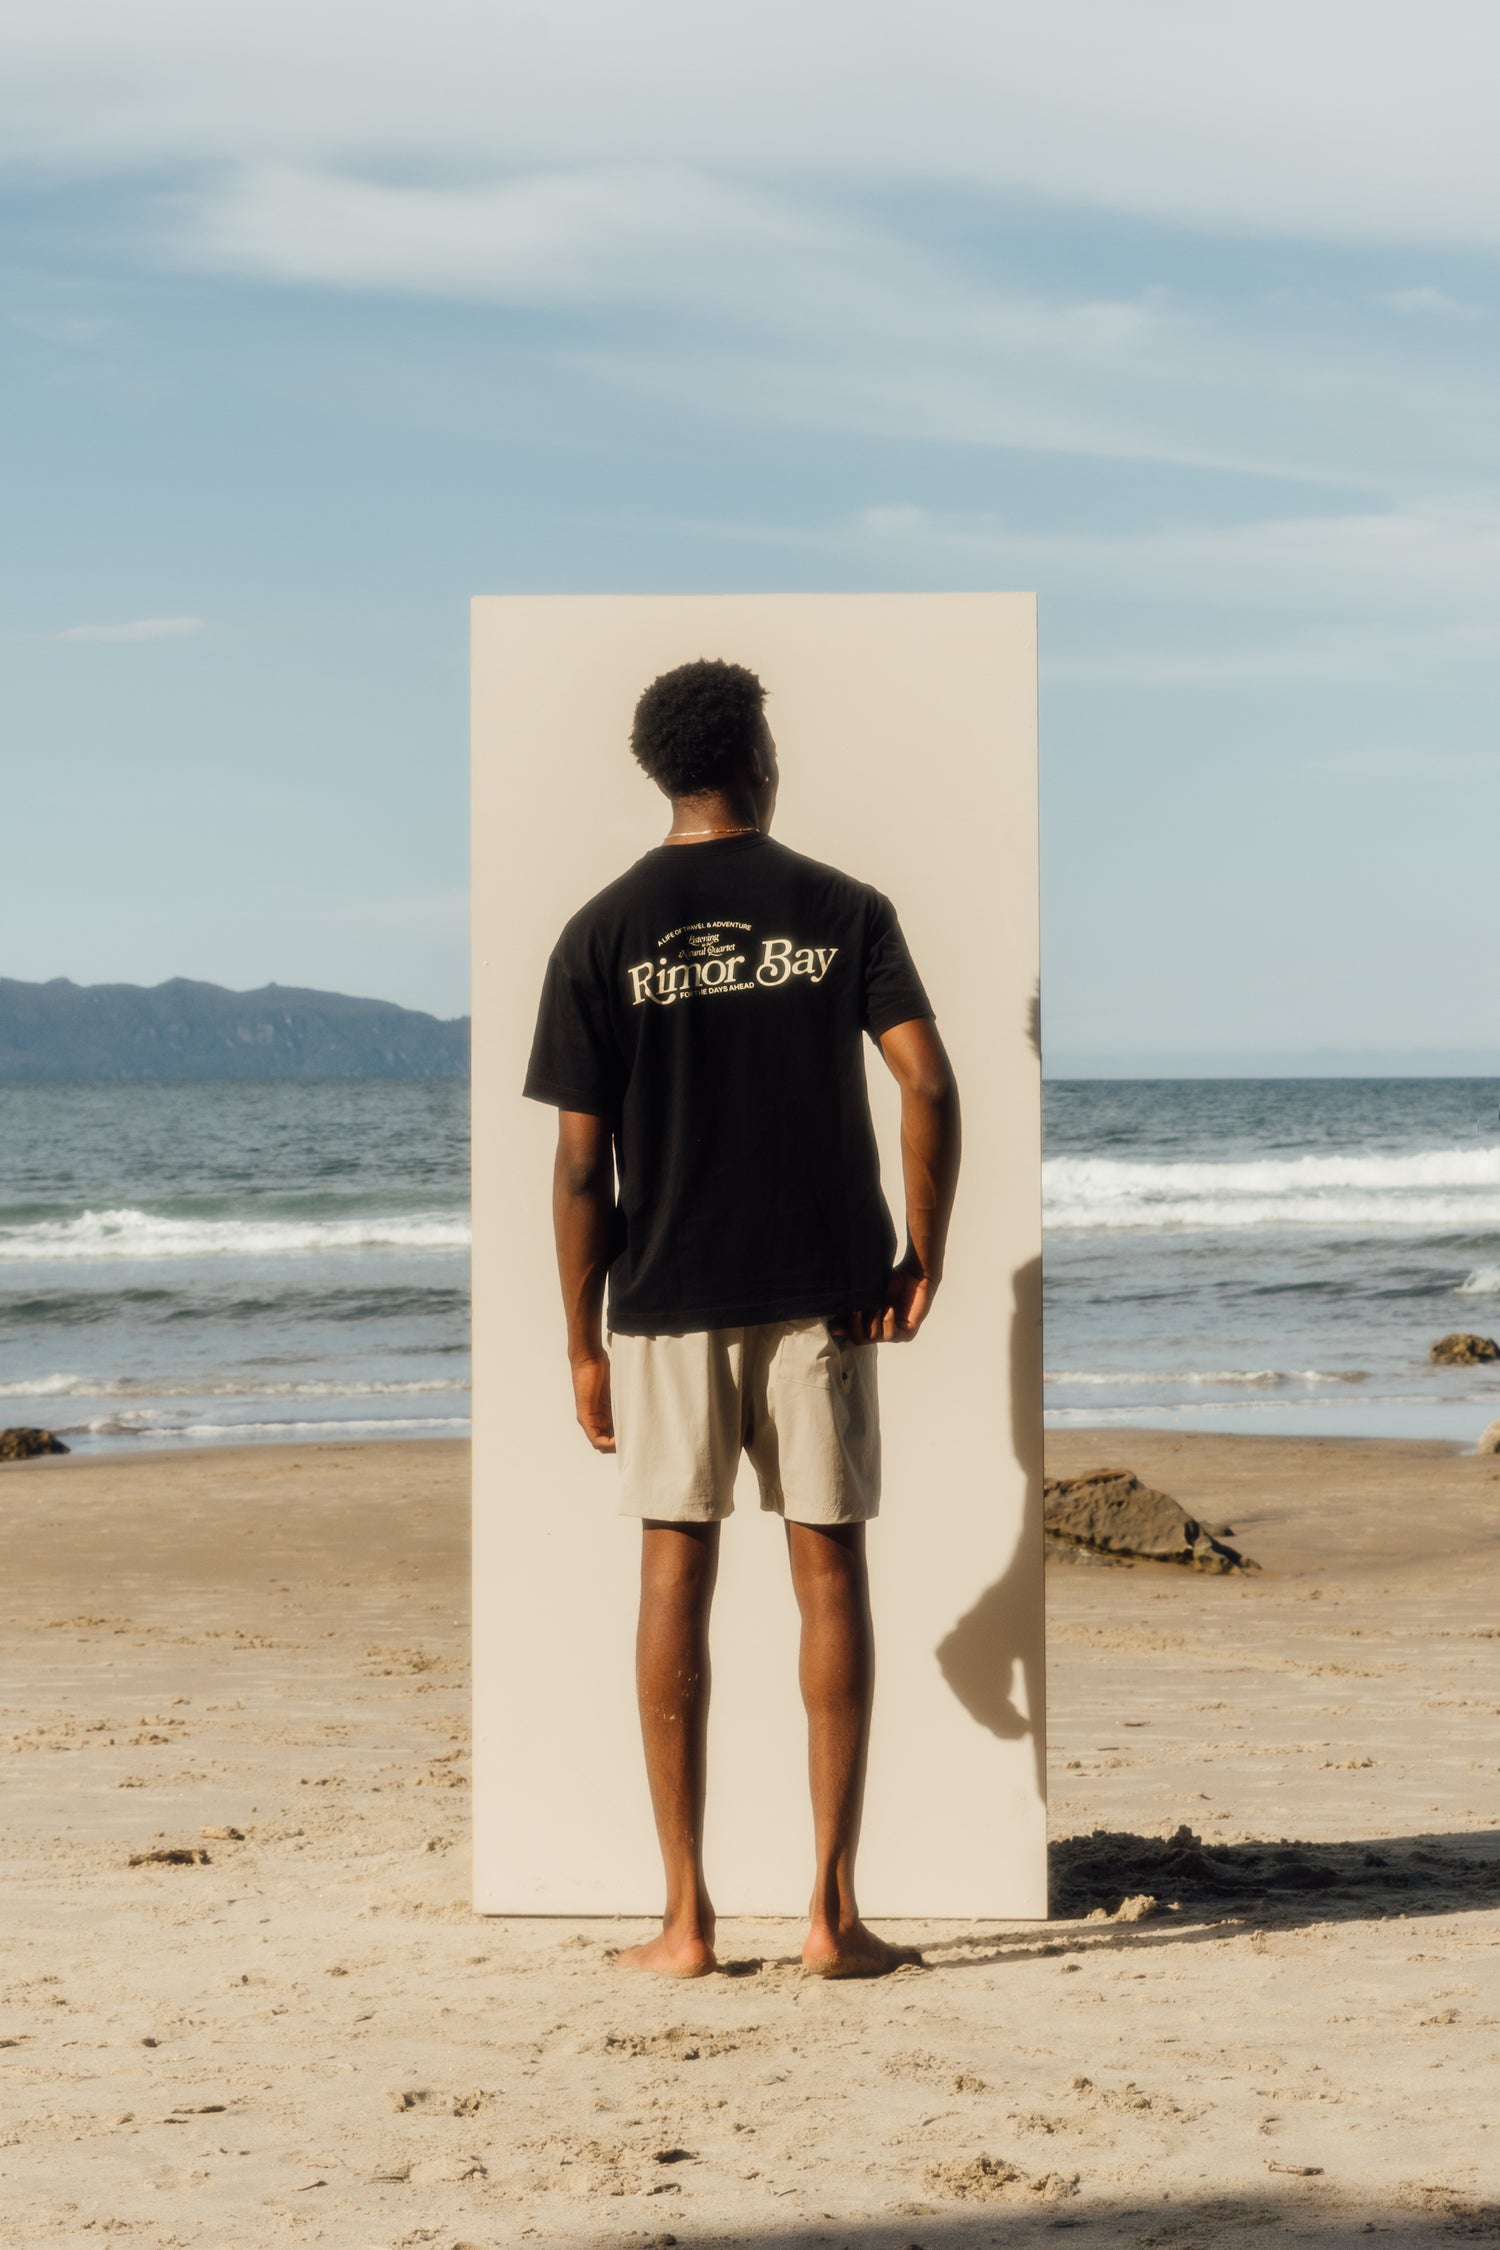 man standing on the beach in front of a beige board wearing a black logo tshirt and grey shorts